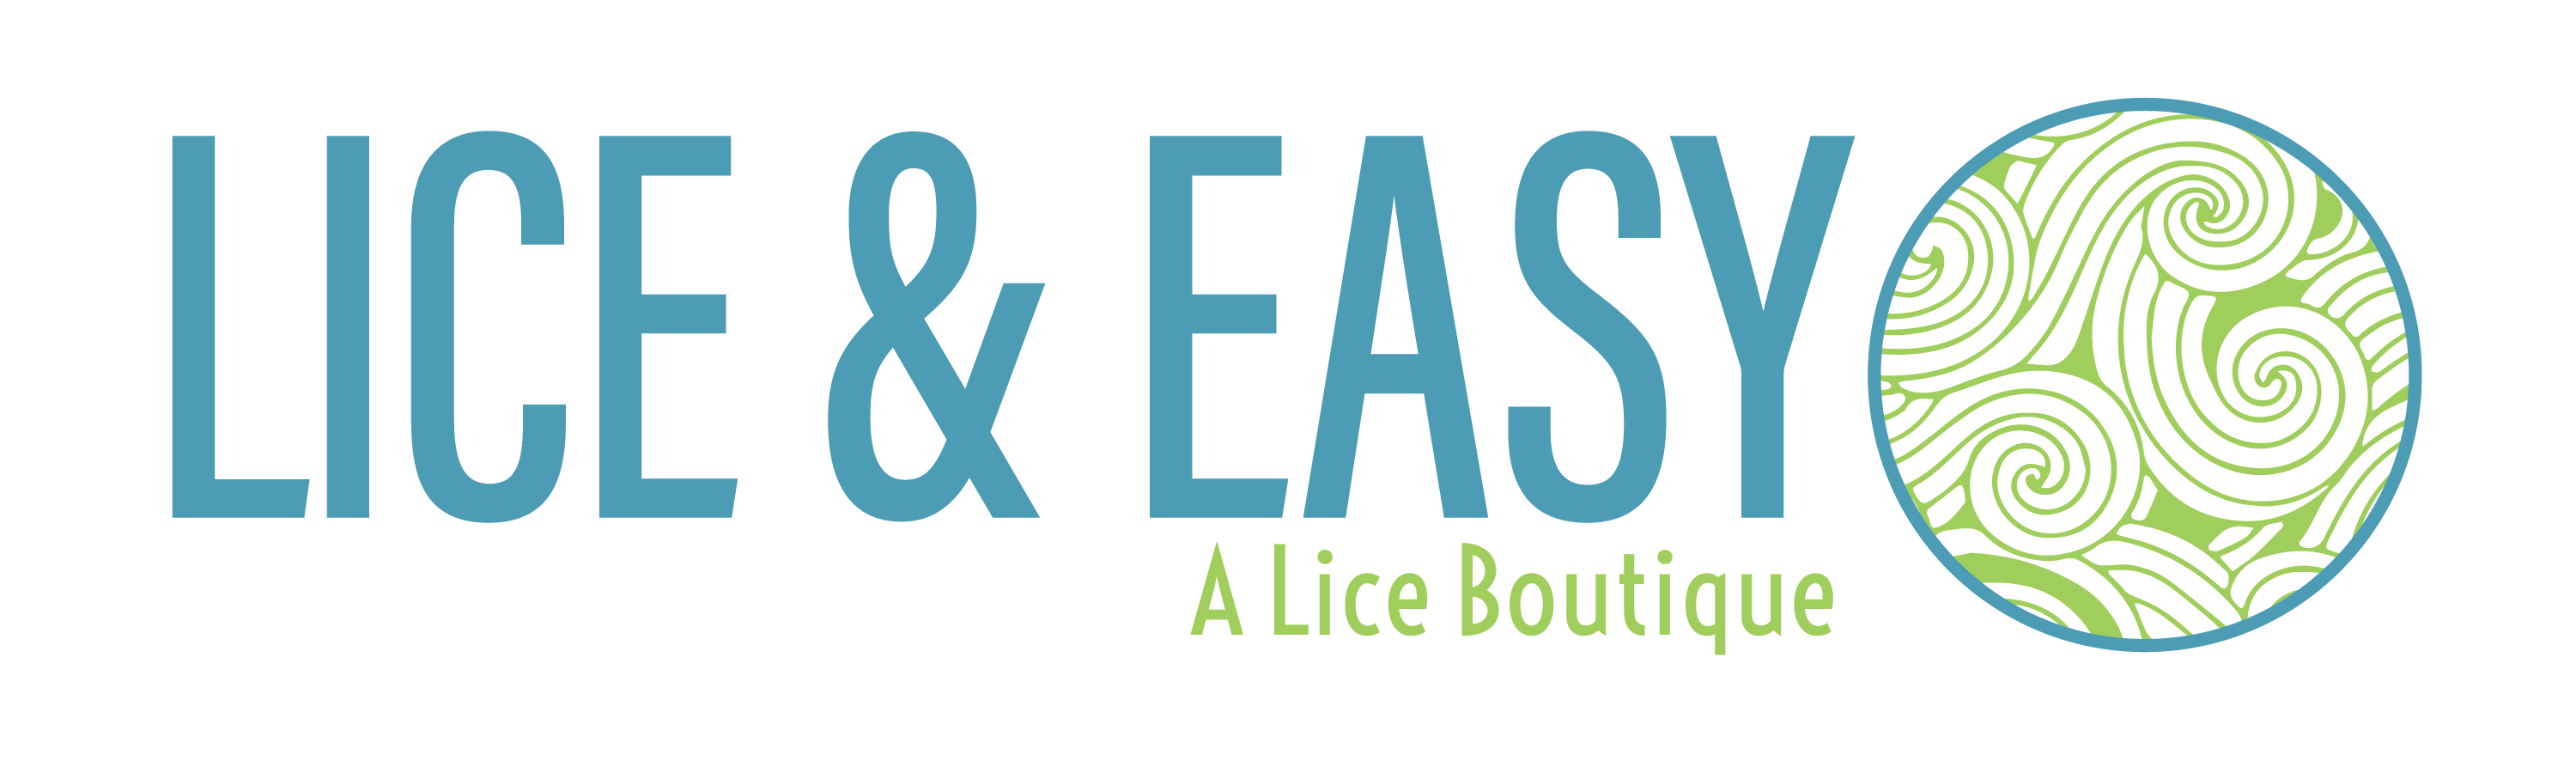 Louse Logo - Head Lice Facts, Picture & Treatment Information. Lice and Easy